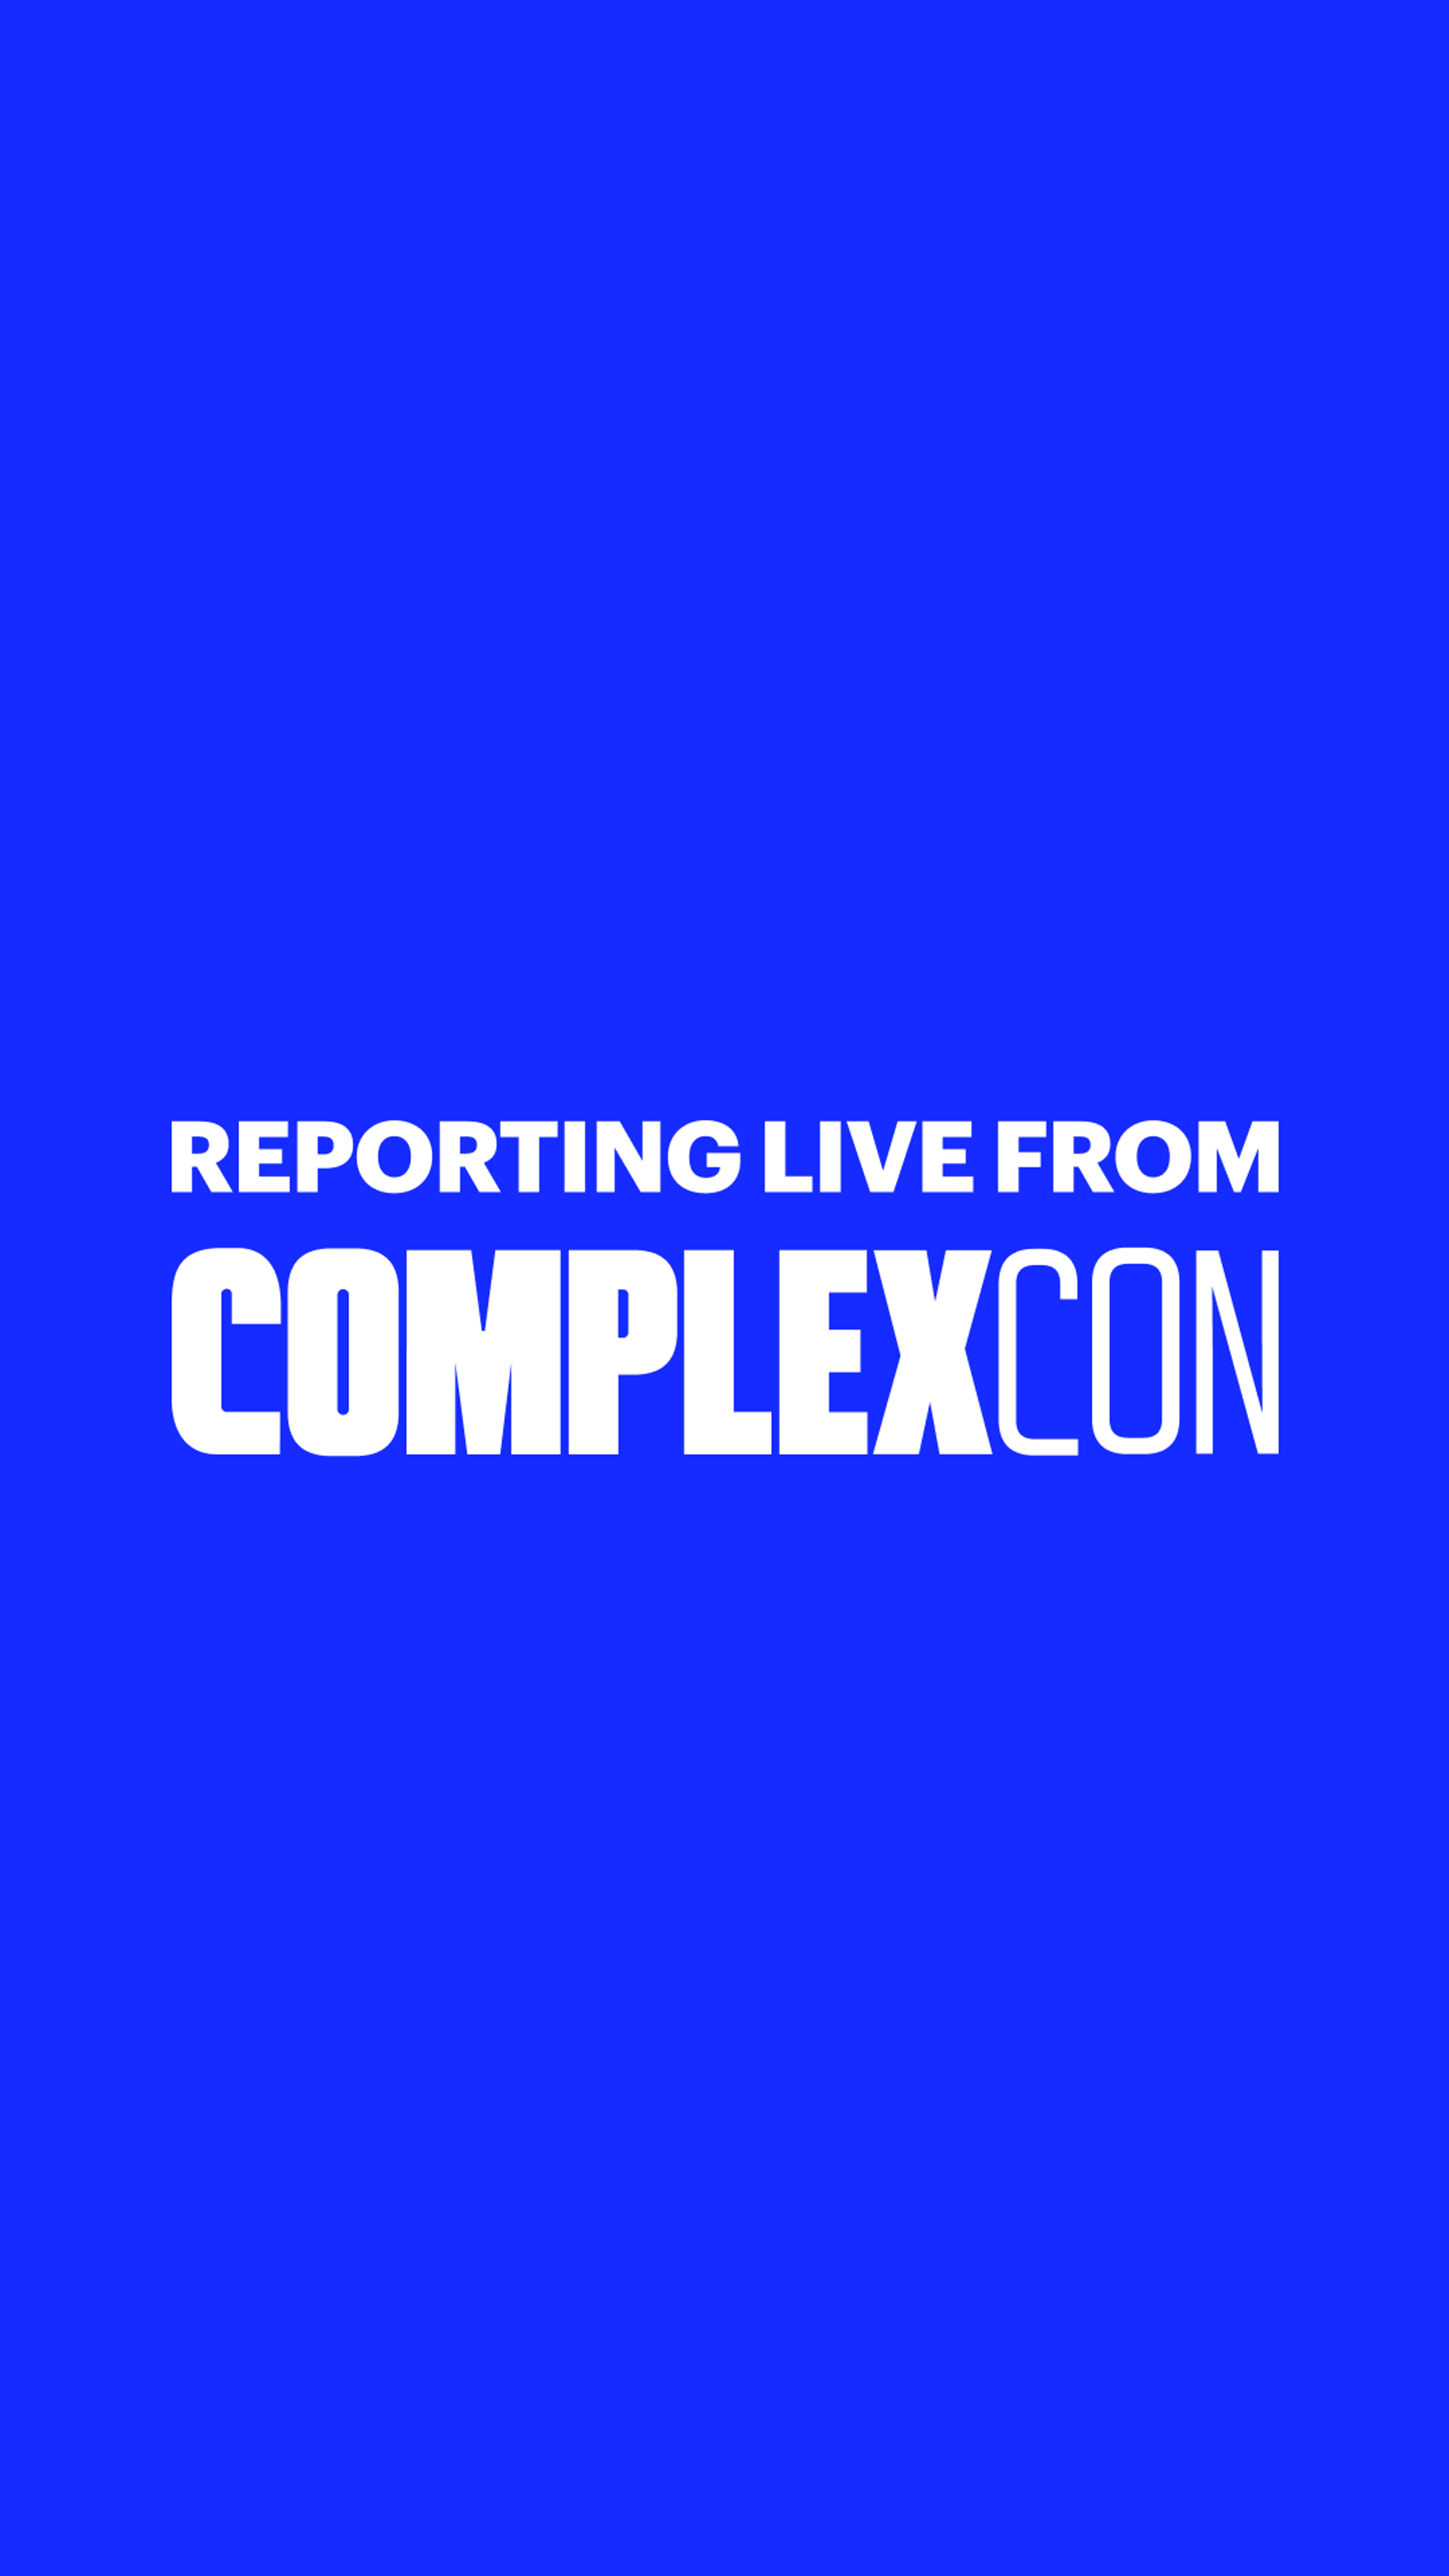 Preview image for the show titled "[DUPLICATE] LIVE FROM COMPLEXCON - Show 1" at Today @ 6:41 PM